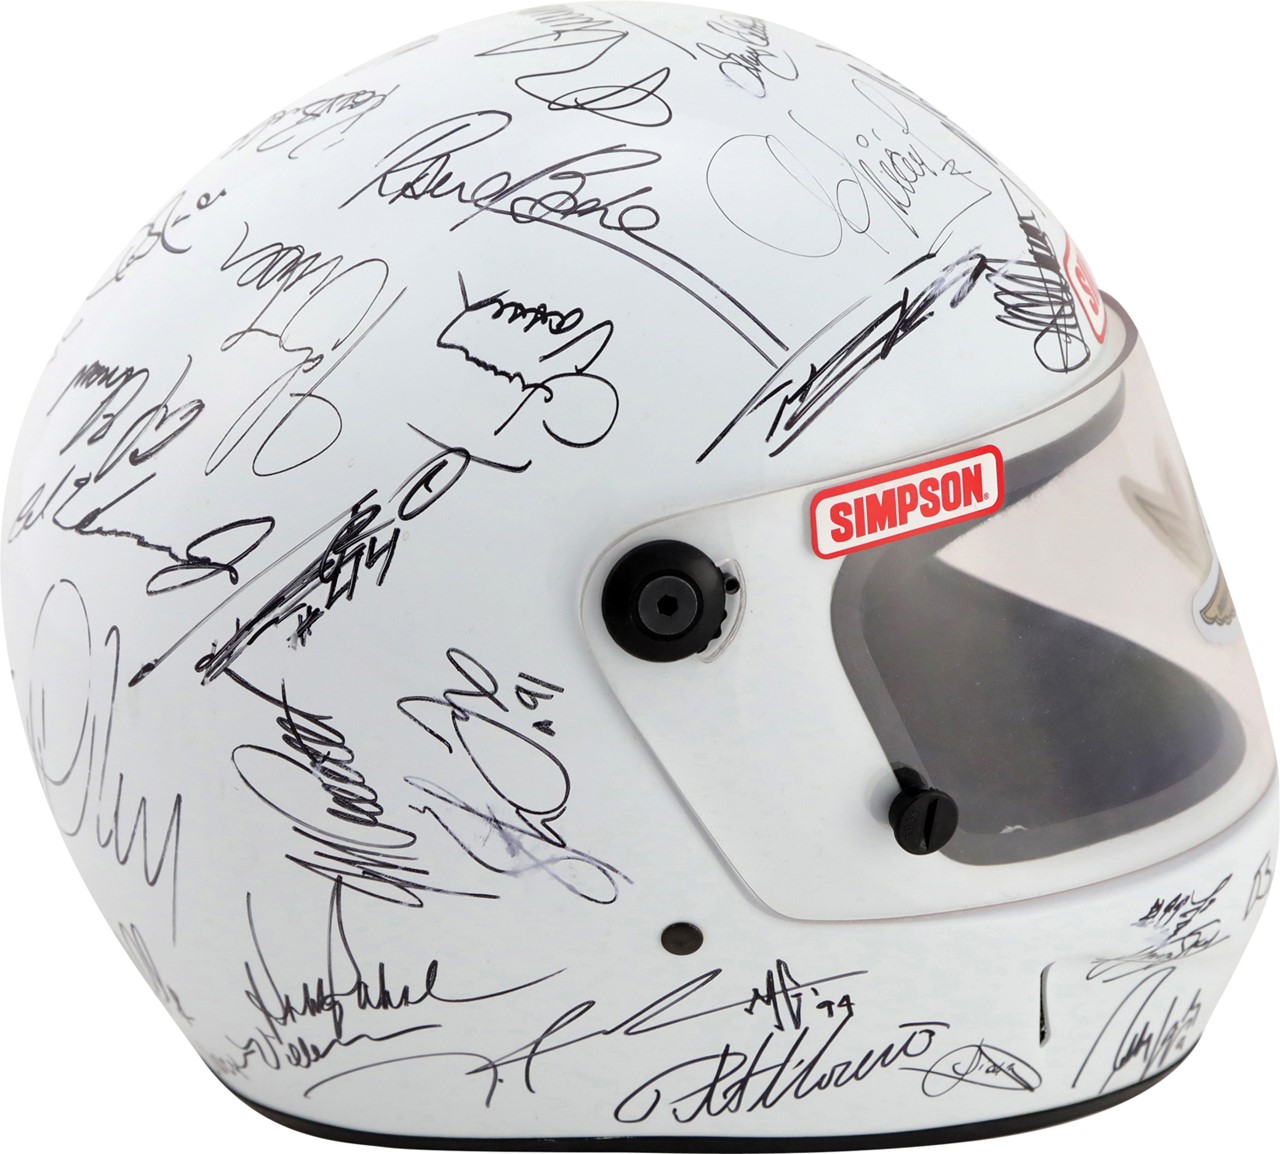 - 1994 Indianapolis 500 Drivers Signed Helmet